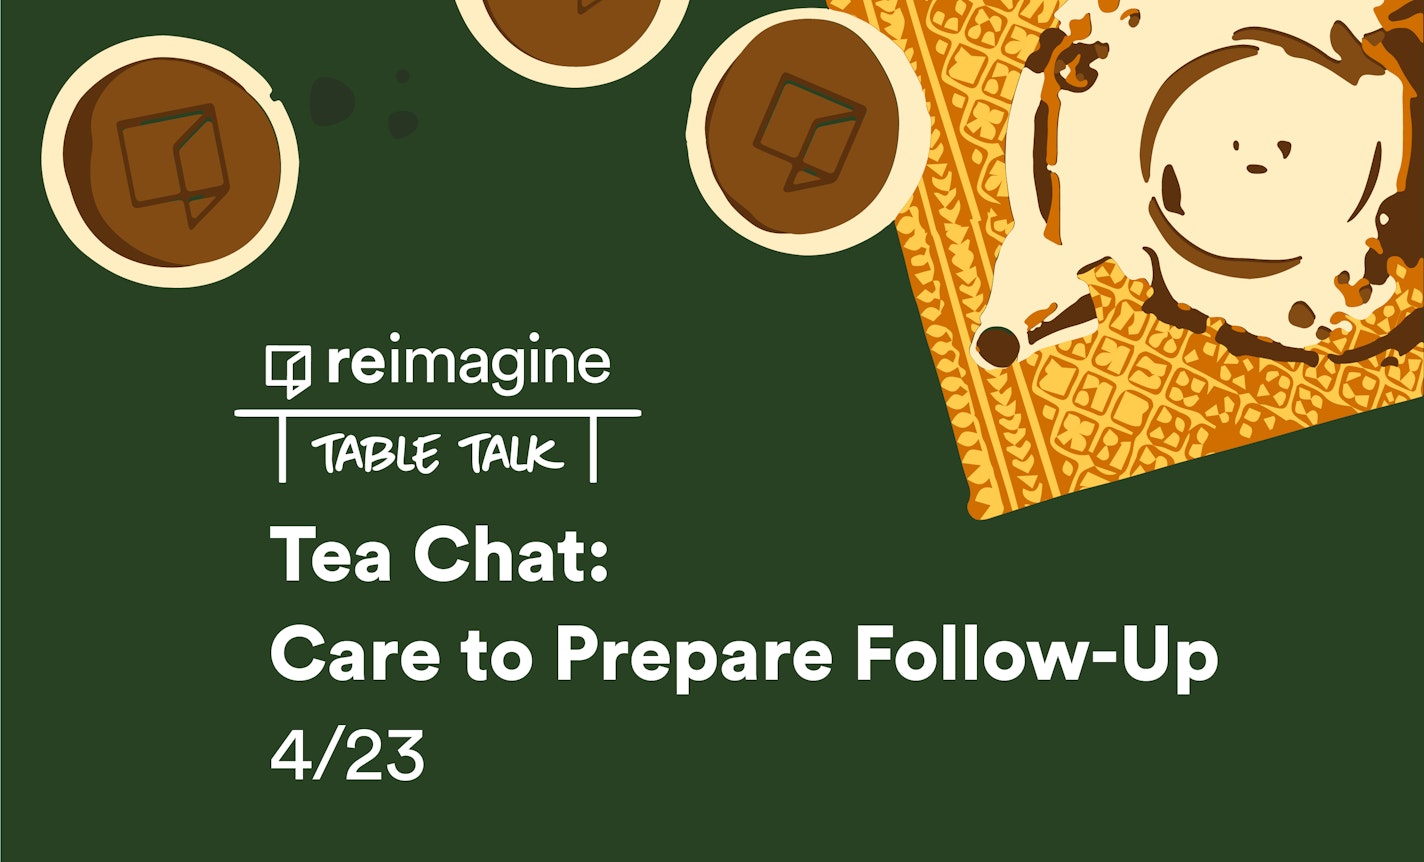 Tea Chat: Care to Prepare Follow-up